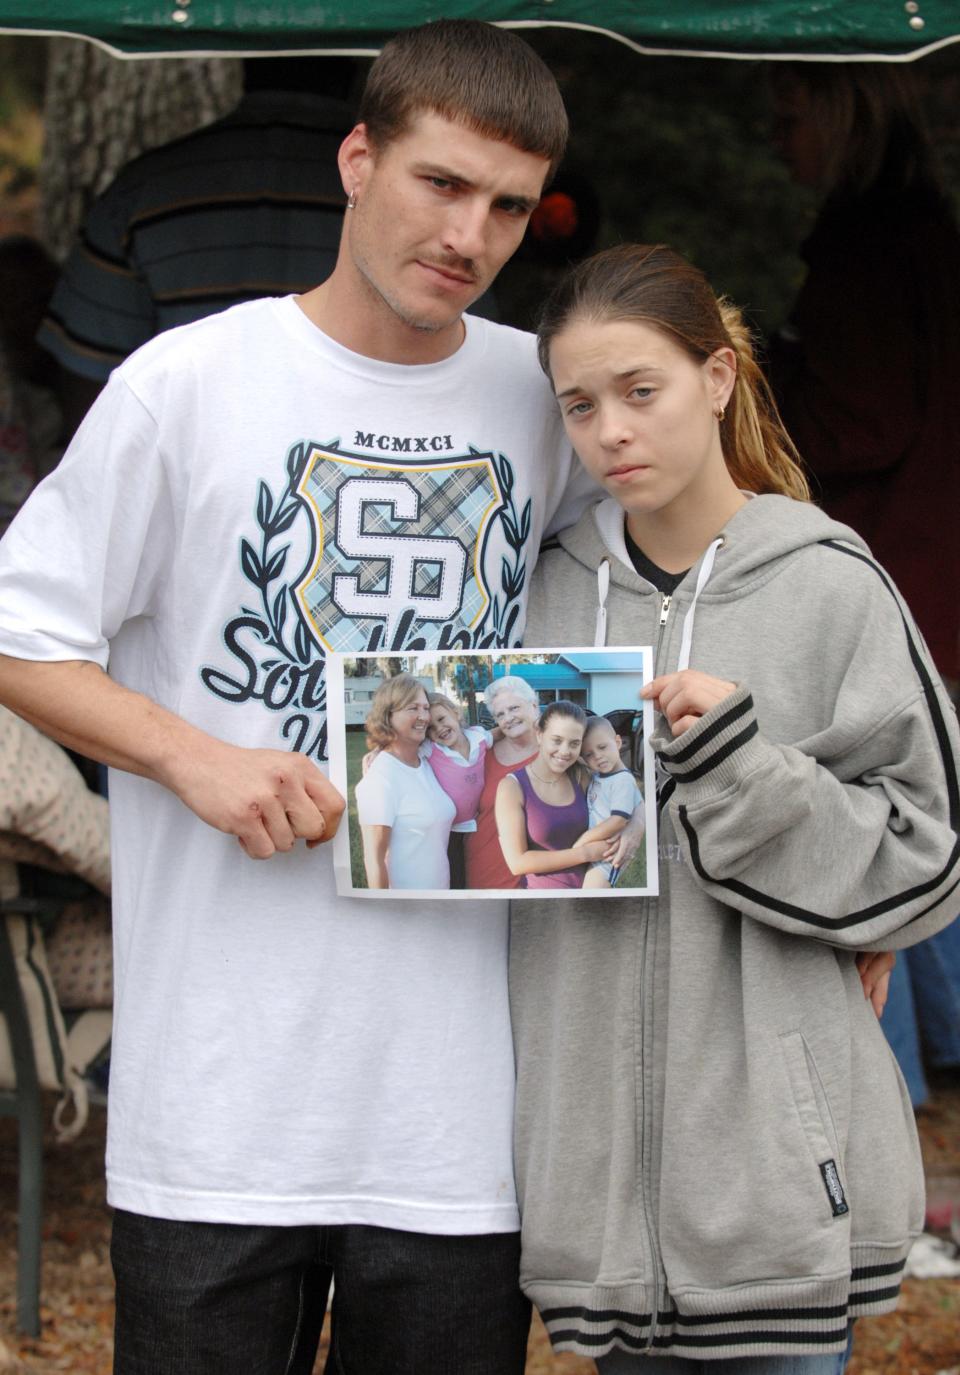 Feb. 12, 2009: Ronald Cummings with his girlfriend Misty Croslin with a family photo from better times during day three in the search for Haleigh.